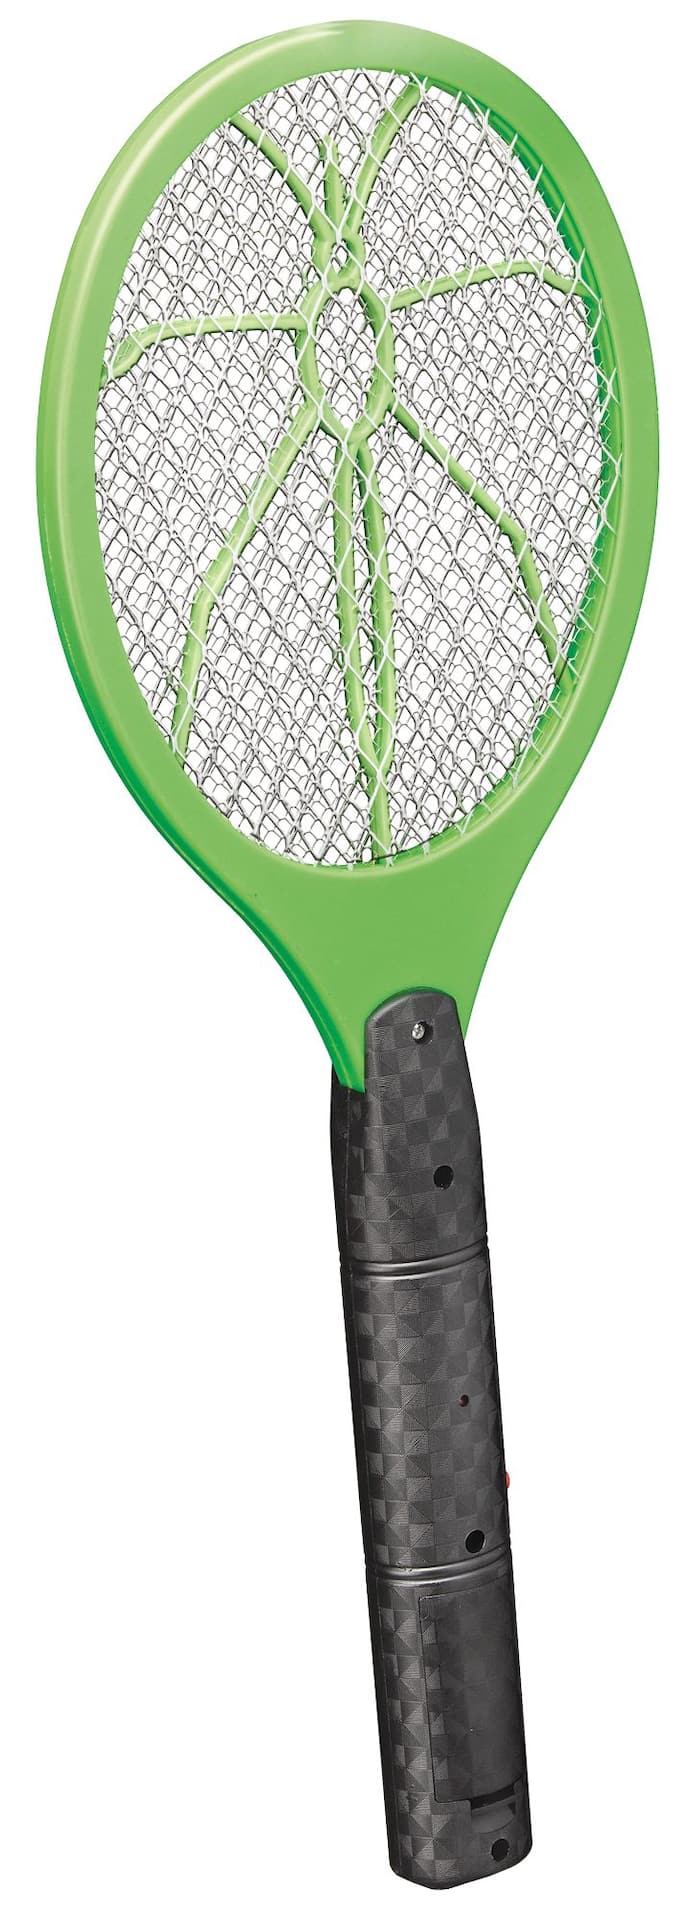 canadian tire fly swatter